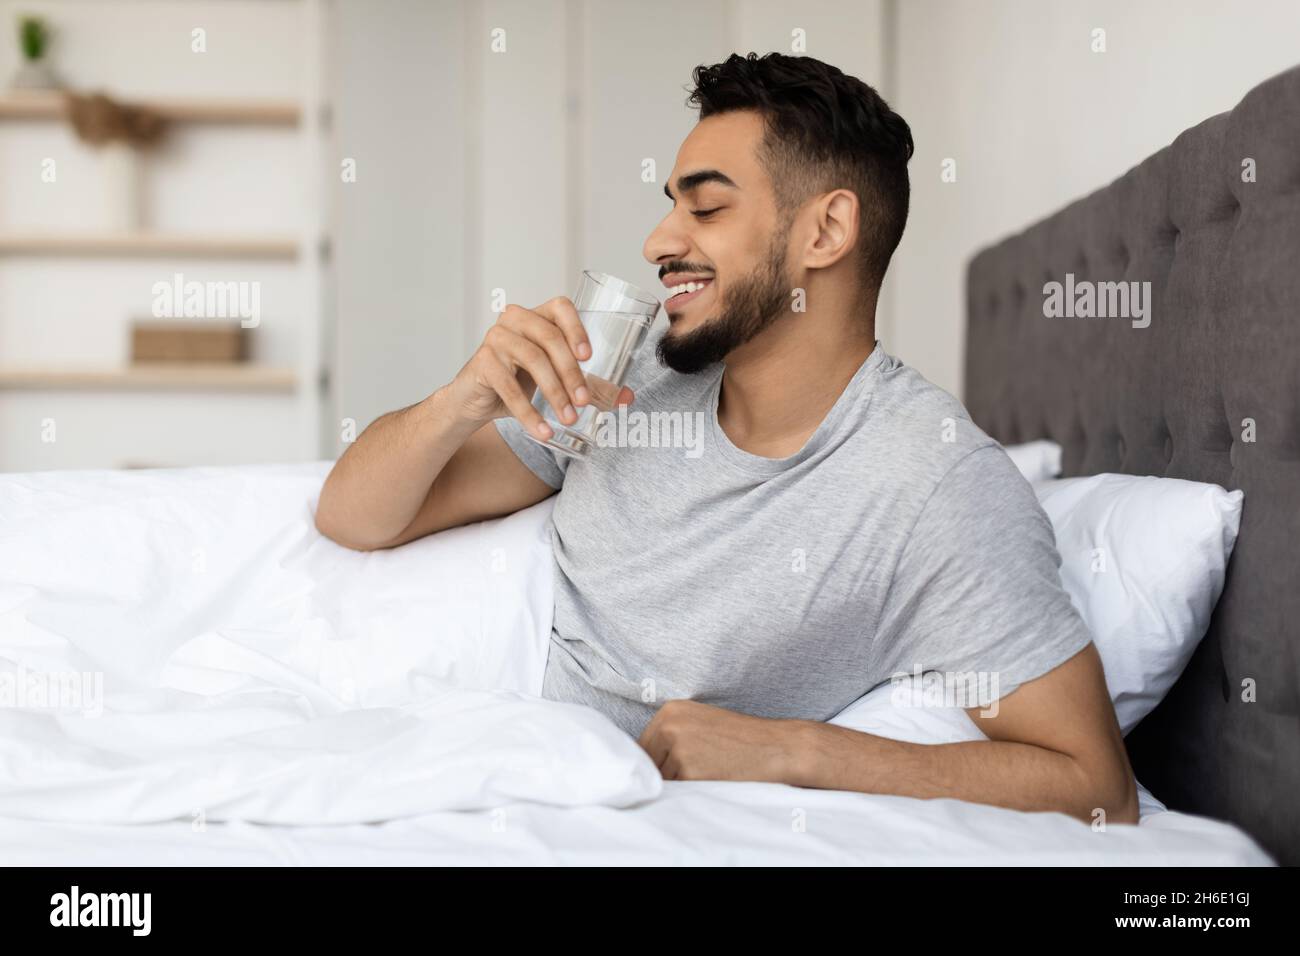 Smiling Arab Guy Drinking Mineral Water From Glass While Sitting In Bed Stock Photo